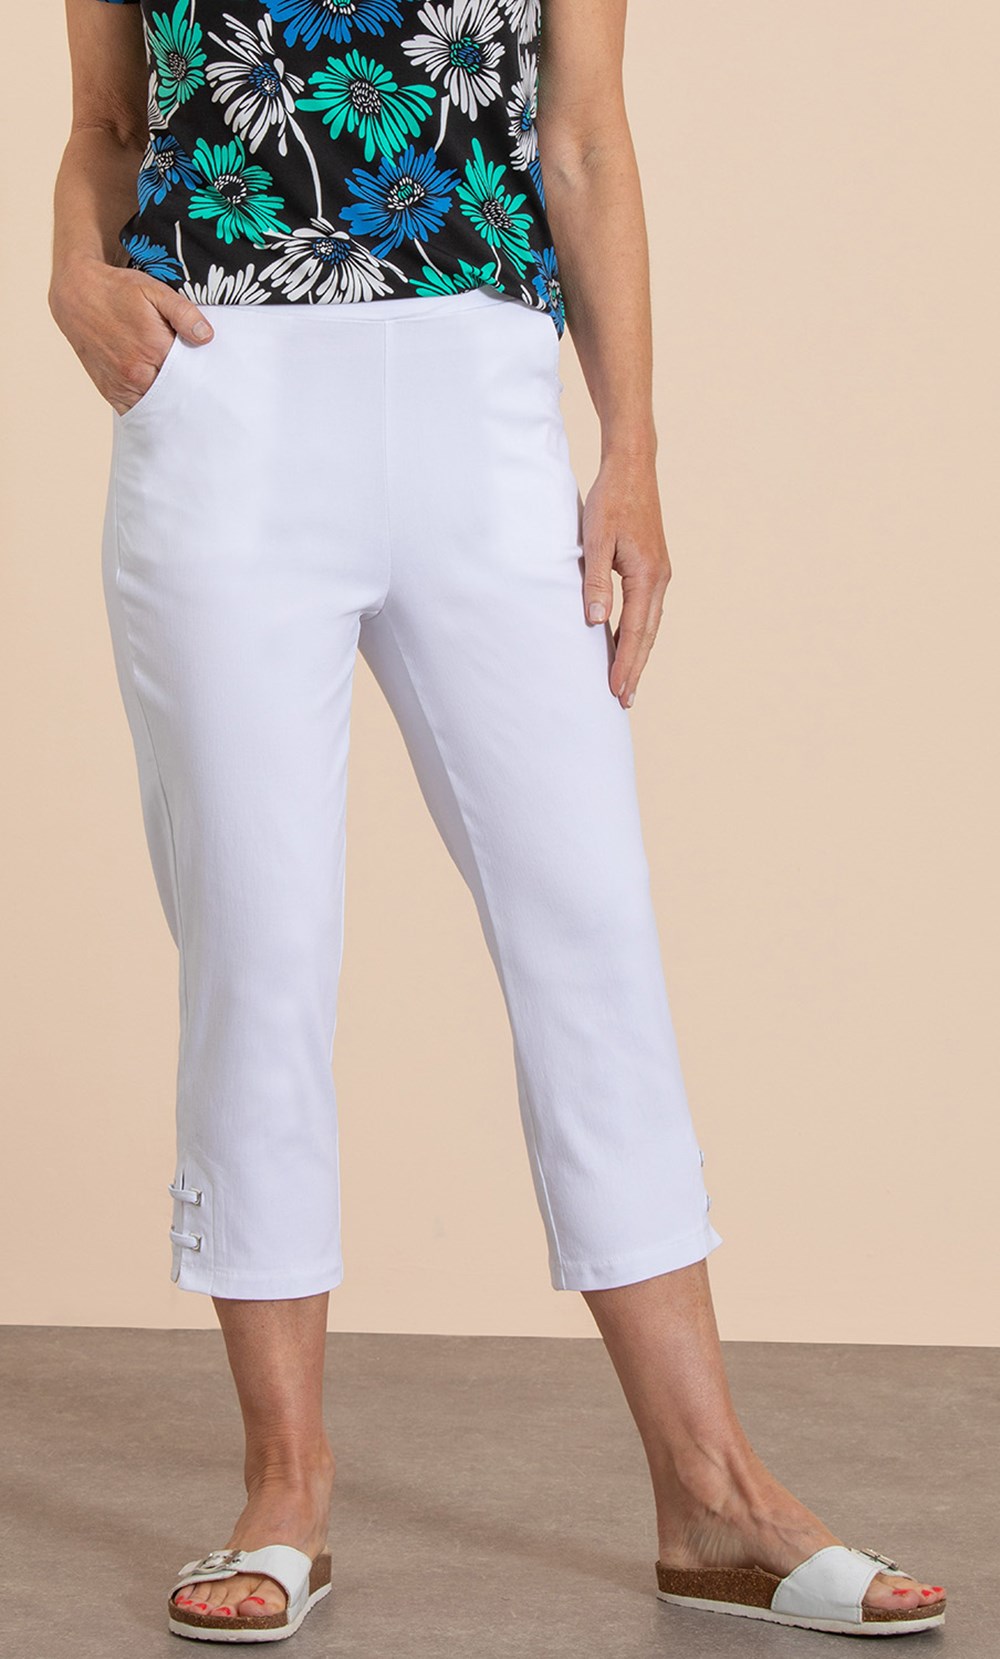 Explore Chic Cream Trousers for Women at Very.co.uk